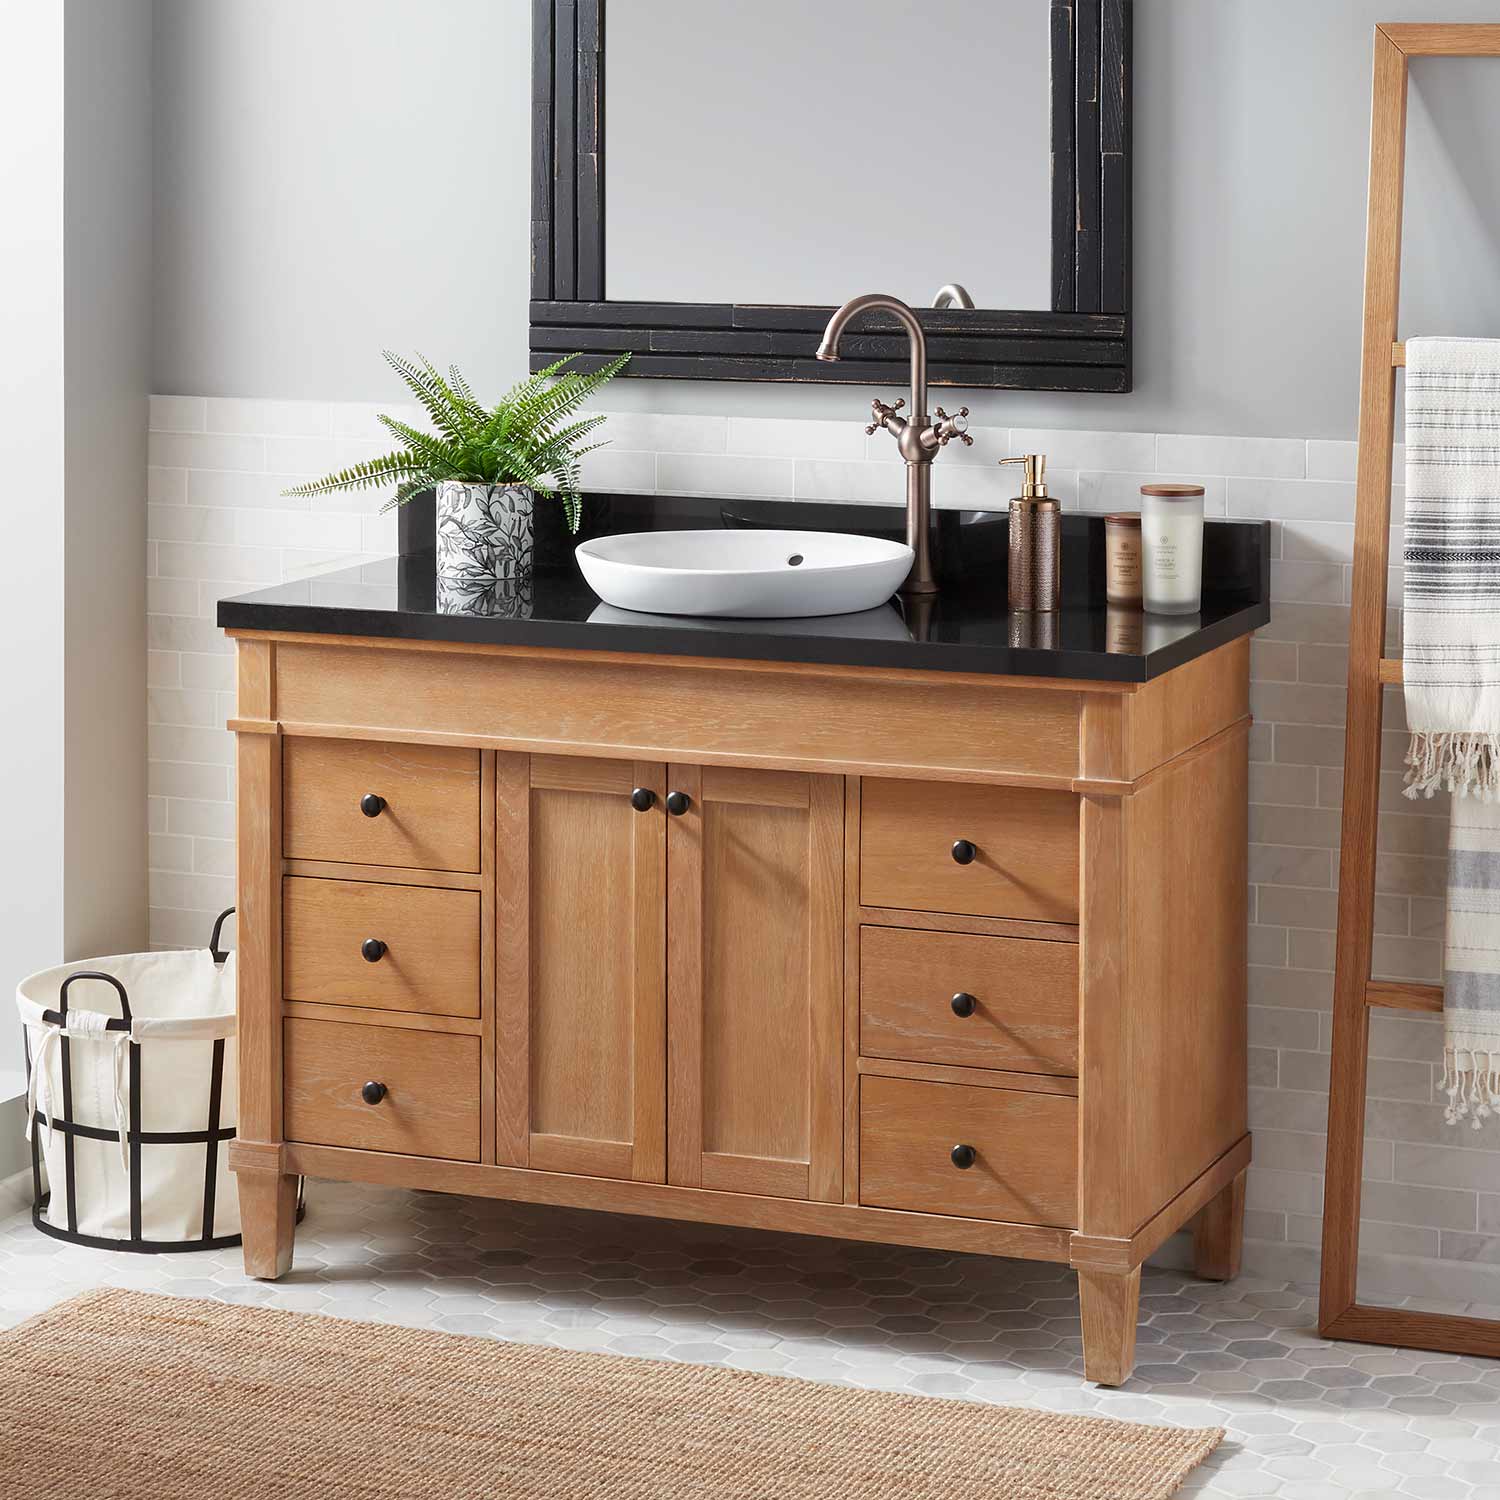 Vanity Set With Solid Oak Wood Cabinet, 48 Vanity Top With Sink On Right Side